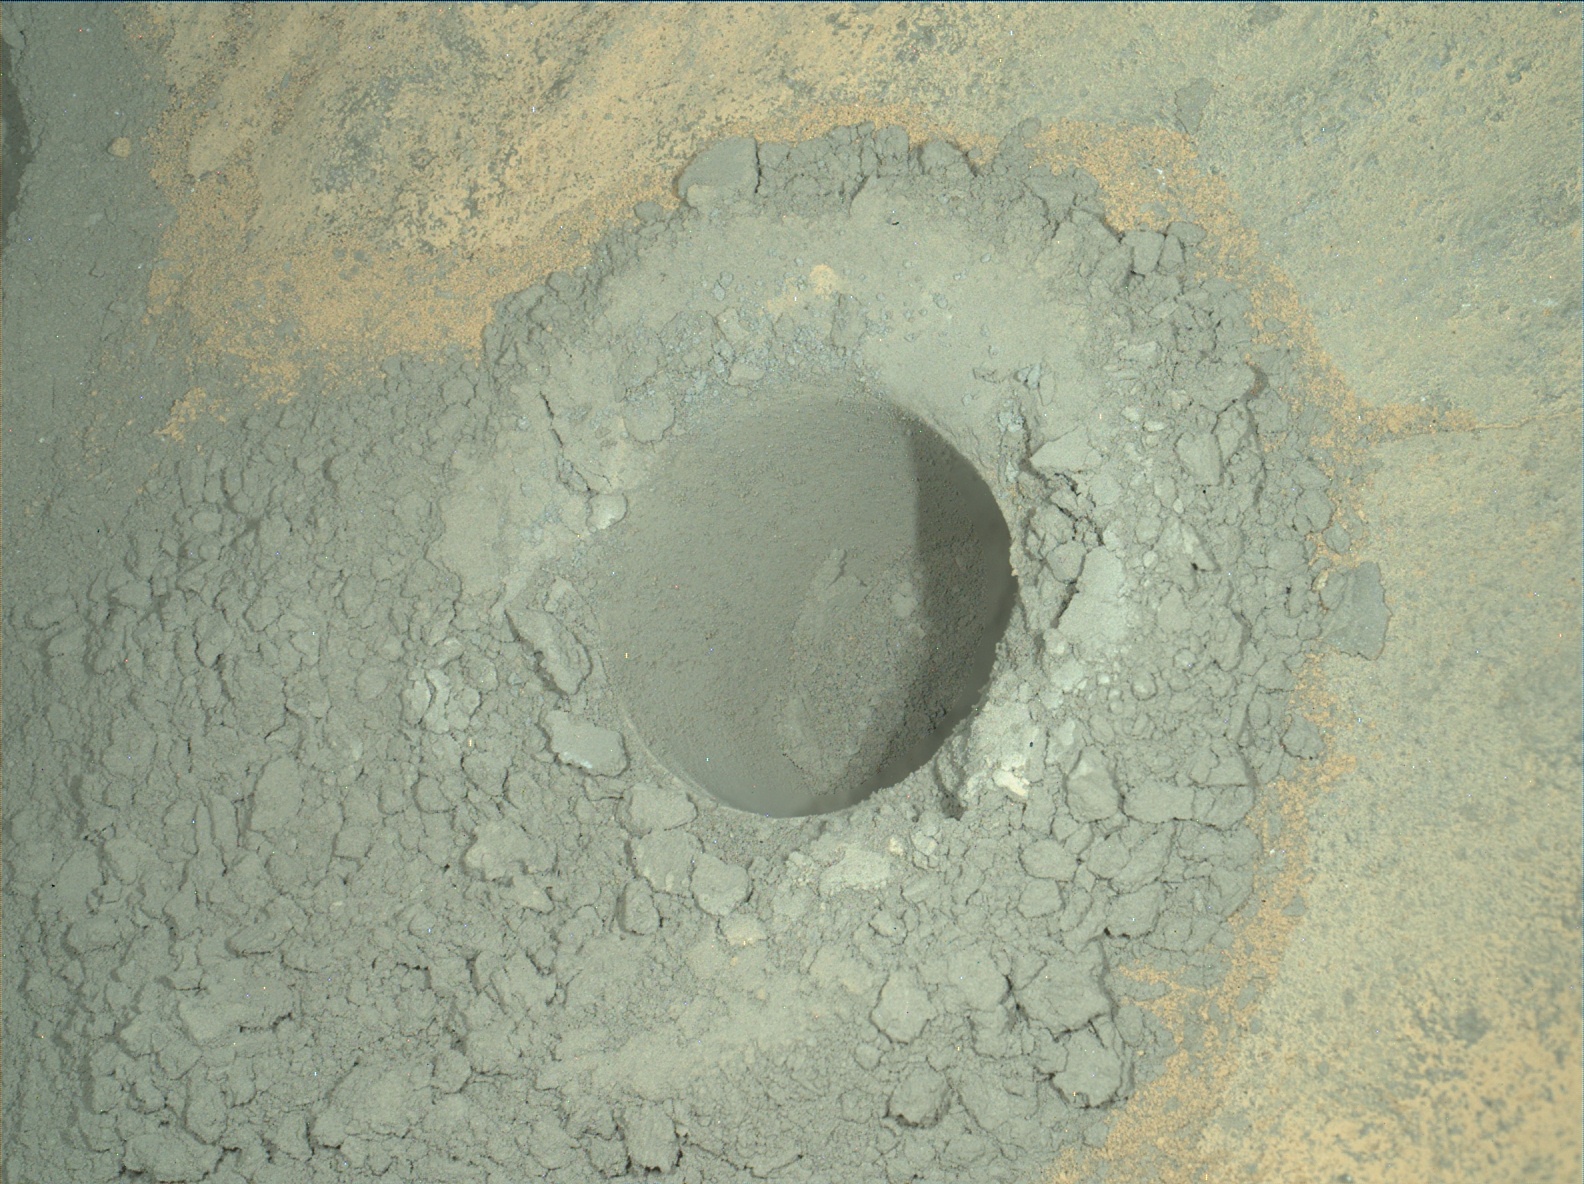 Nasa's Mars rover Curiosity acquired this image using its Mars Hand Lens Imager (MAHLI) on Sol 629